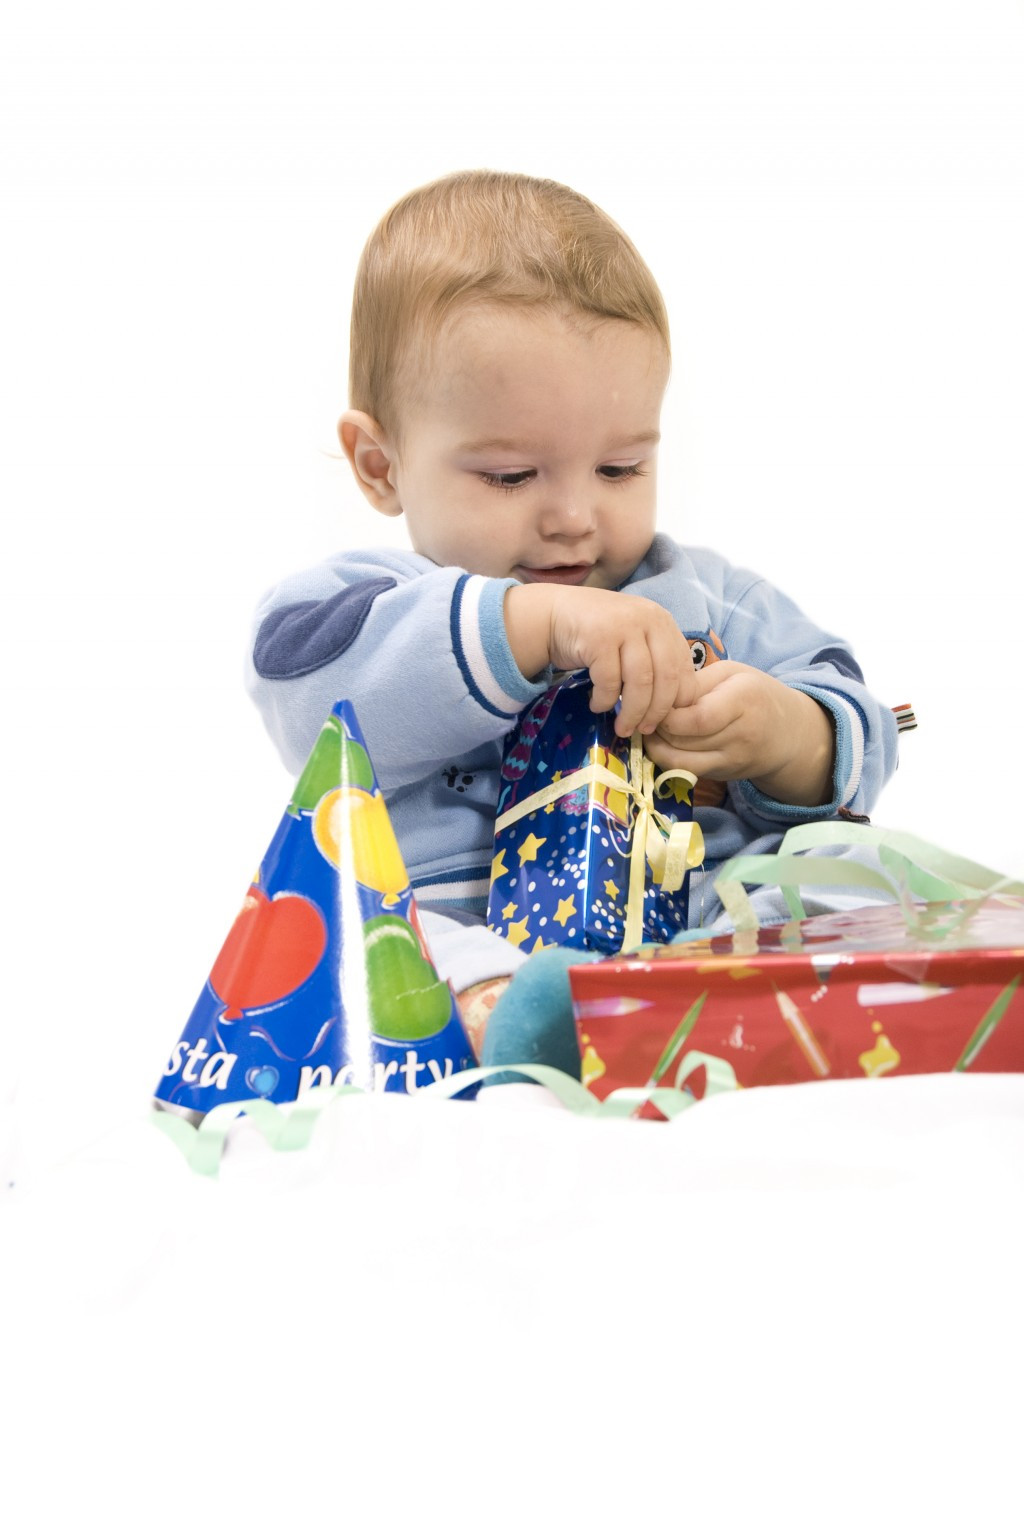 Christmas Gifts For 1 Year Old Boy
 Best Birthday and Christmas Gift Ideas for a e Year Old Boy